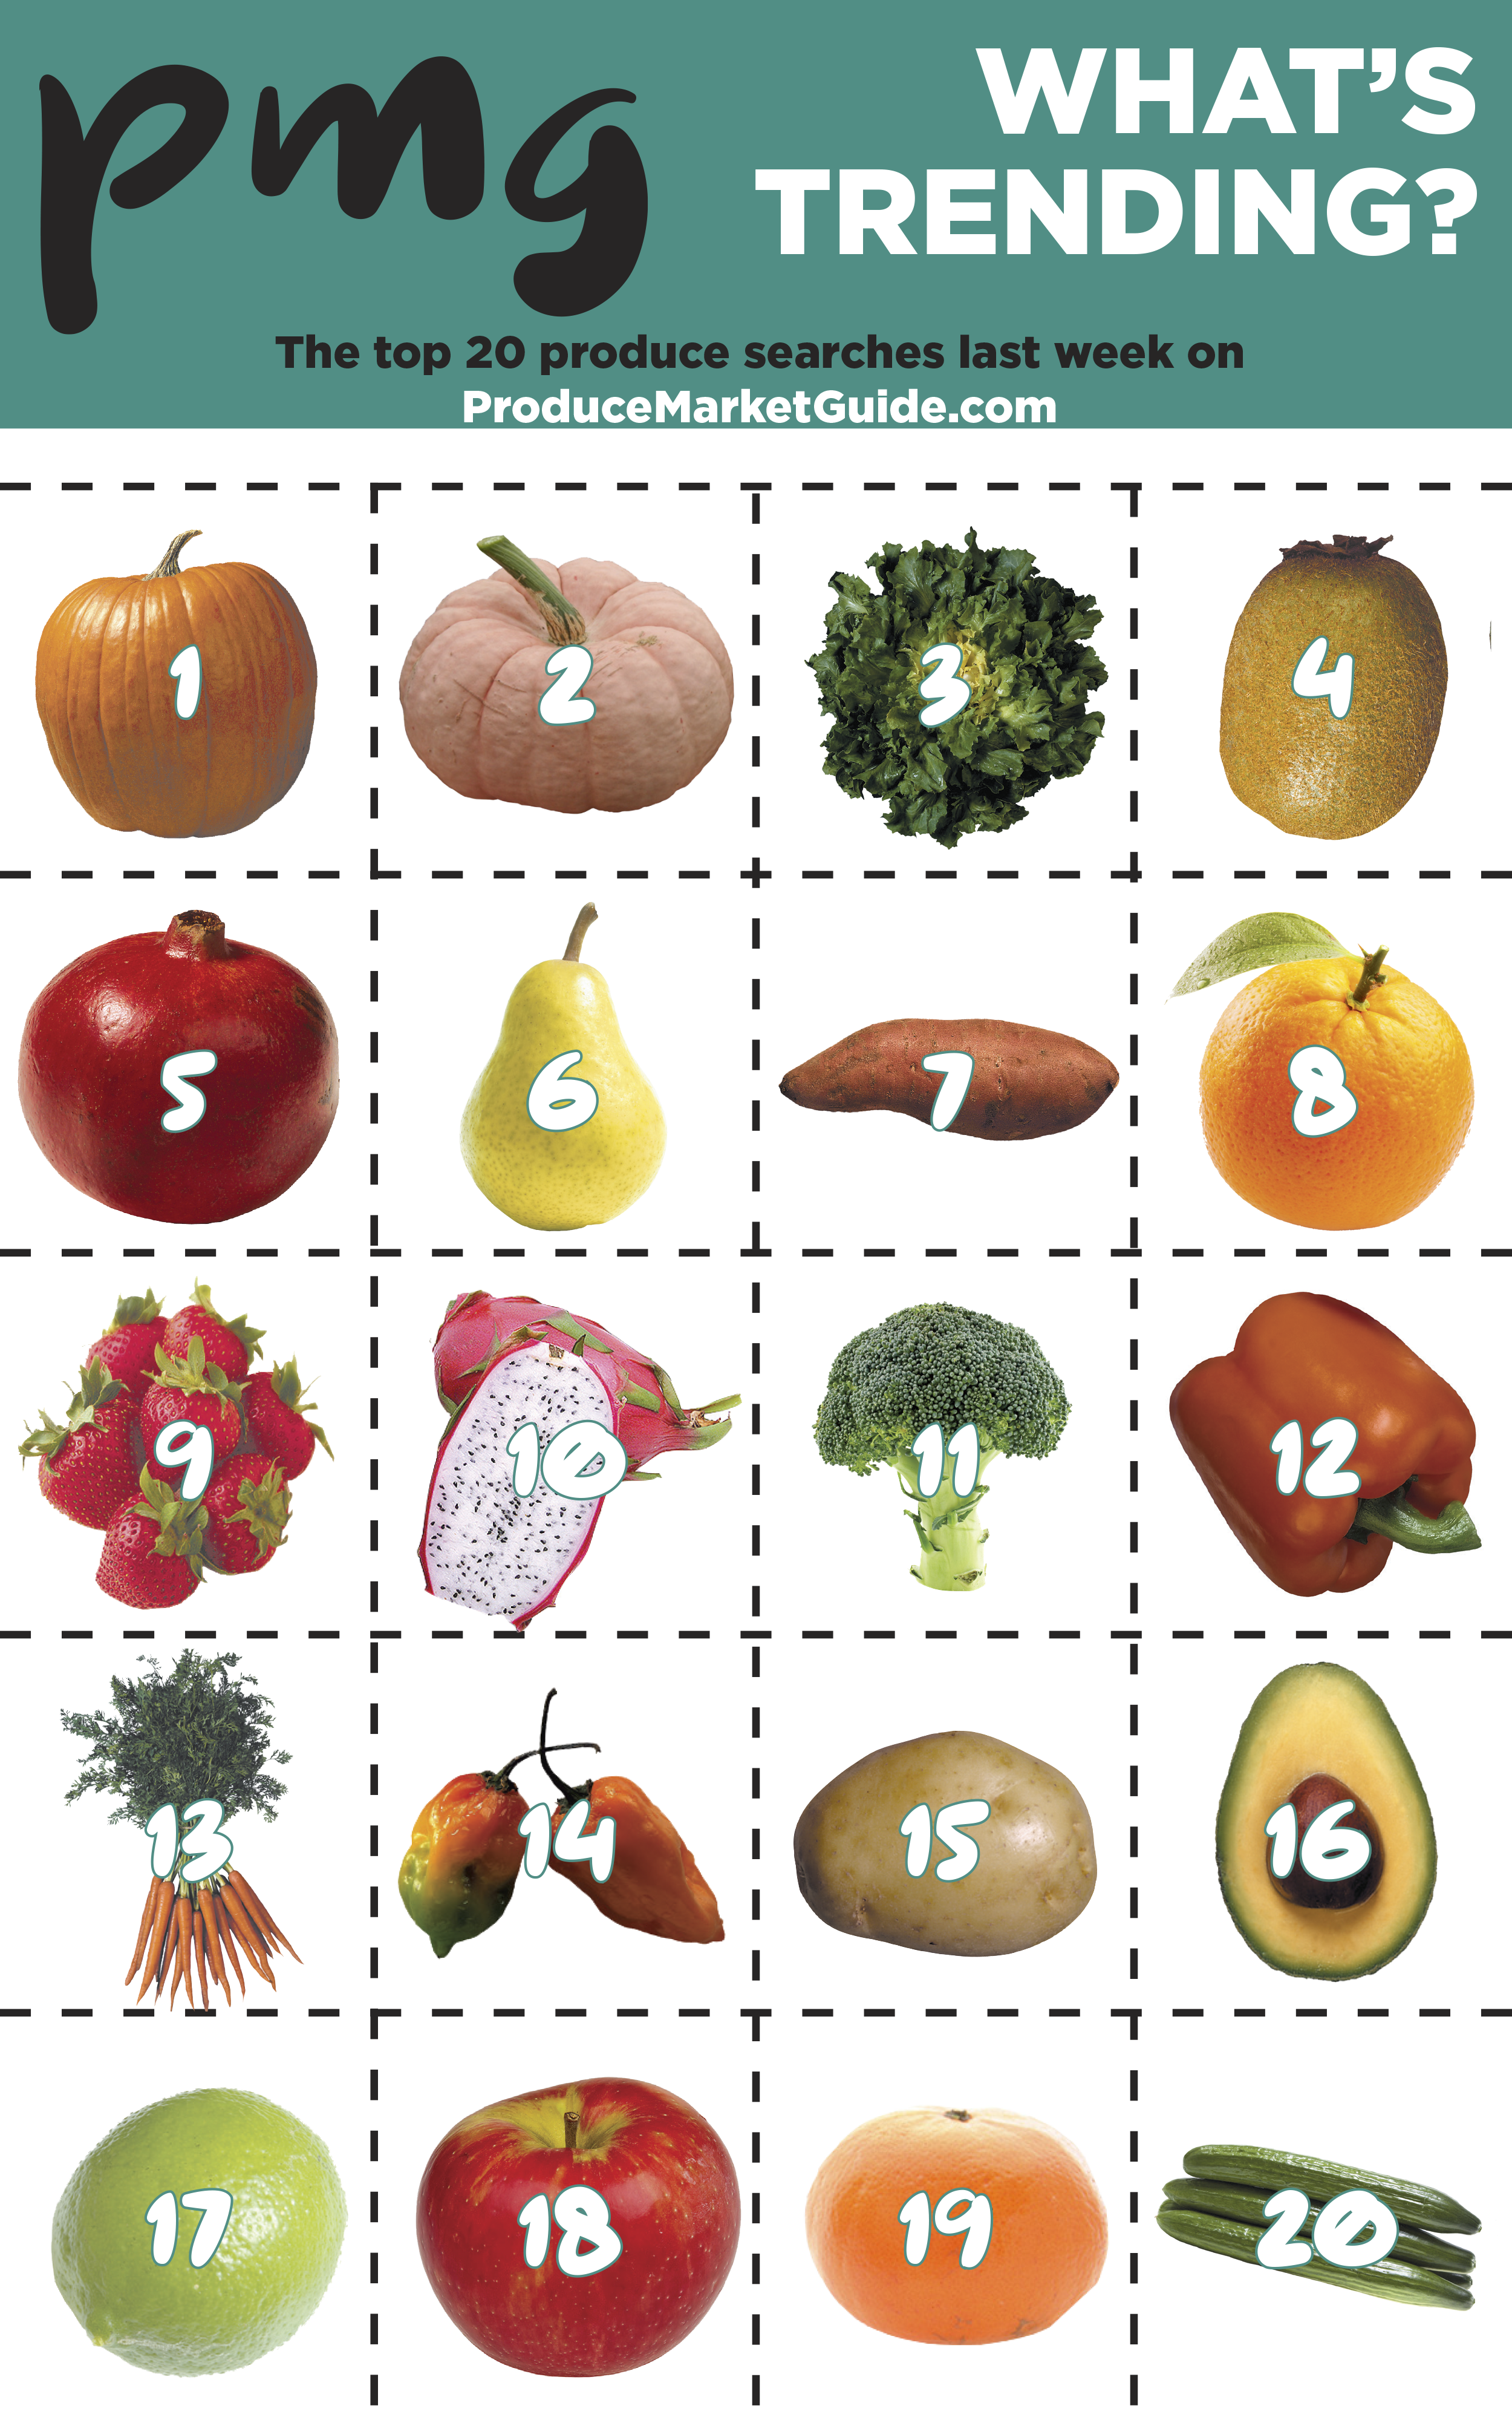 The top 20 fruits and vegetables on producemarketguide.com the week of Oct. 26.